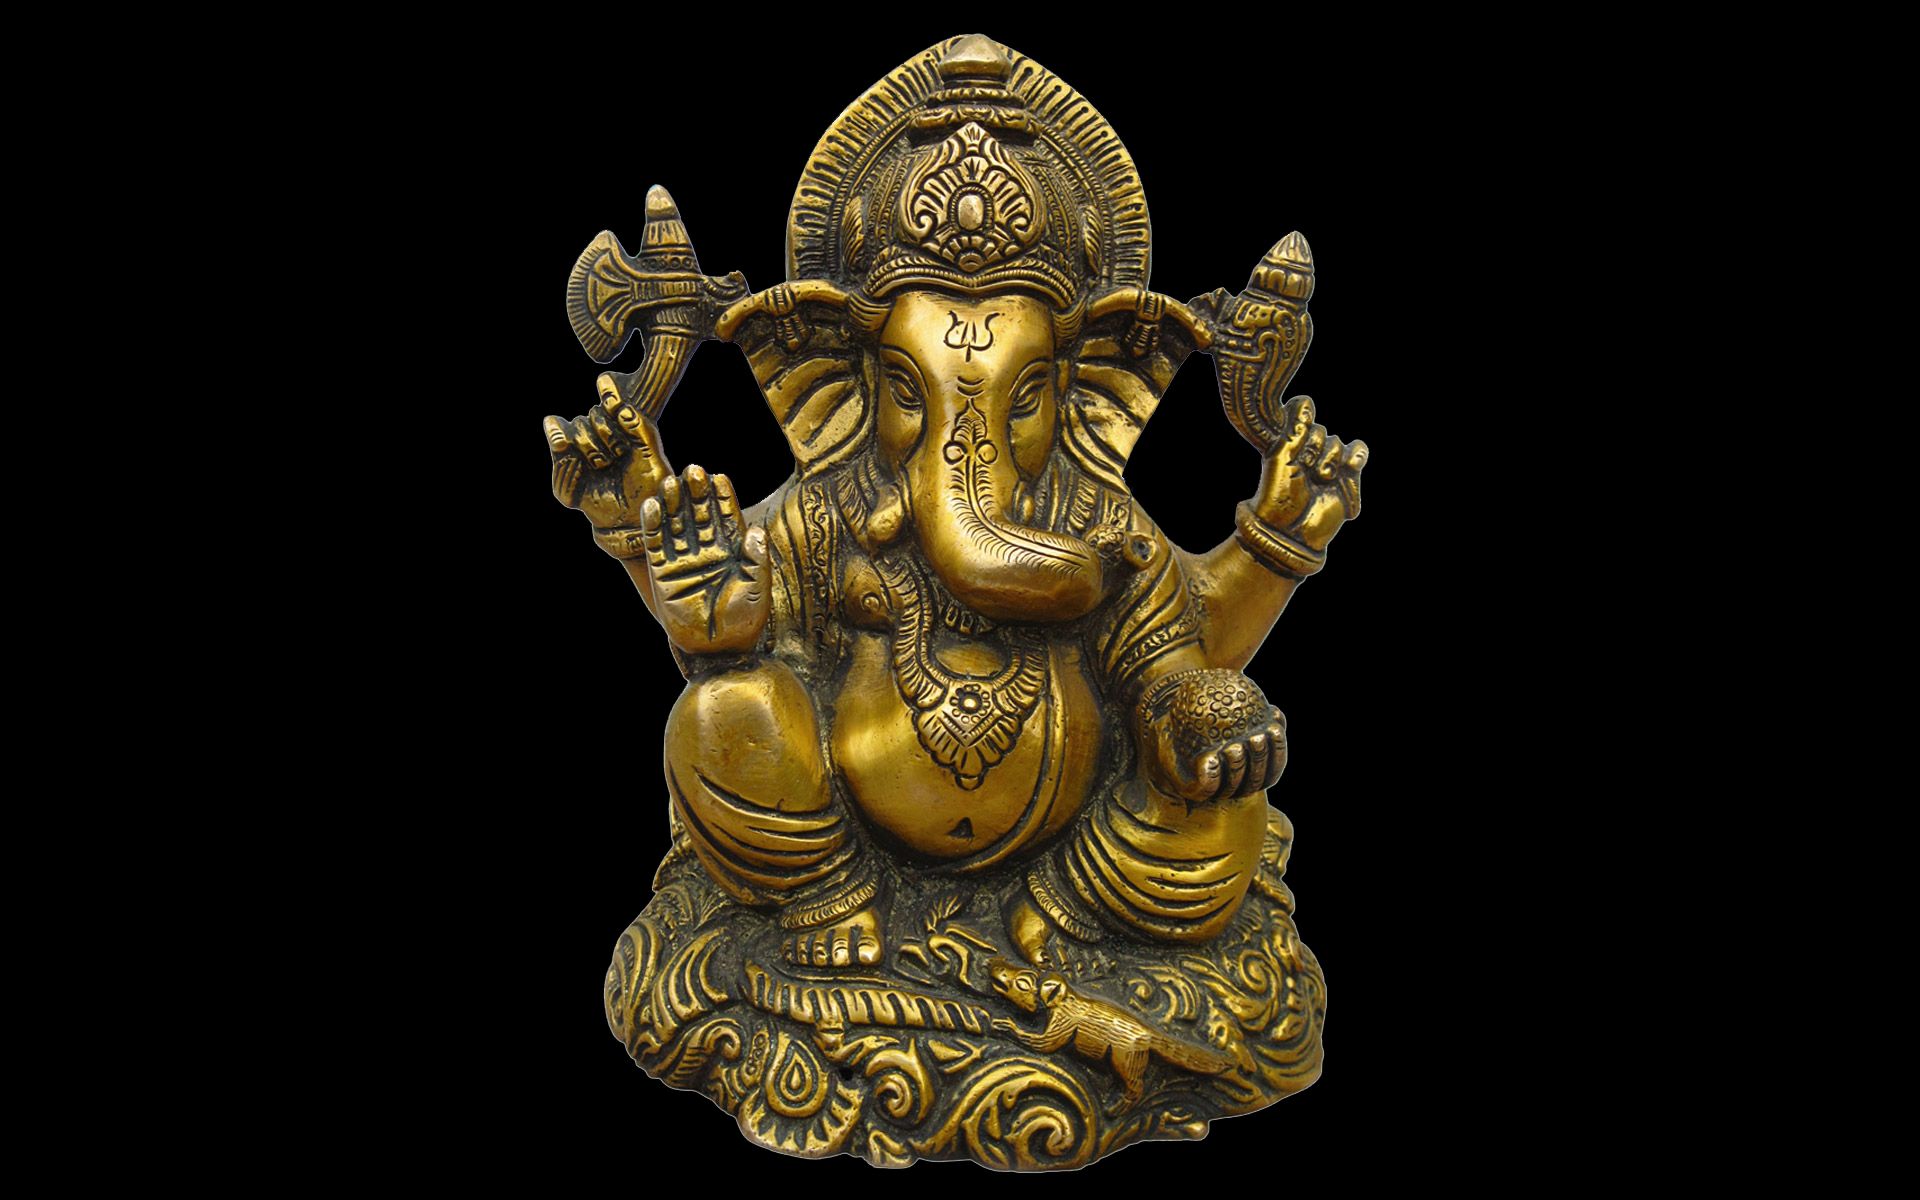 Lord Ganesha Wallpapers Hd For Mobile Free Download - Hinduism T Shirt -  1920x1200 Wallpaper 